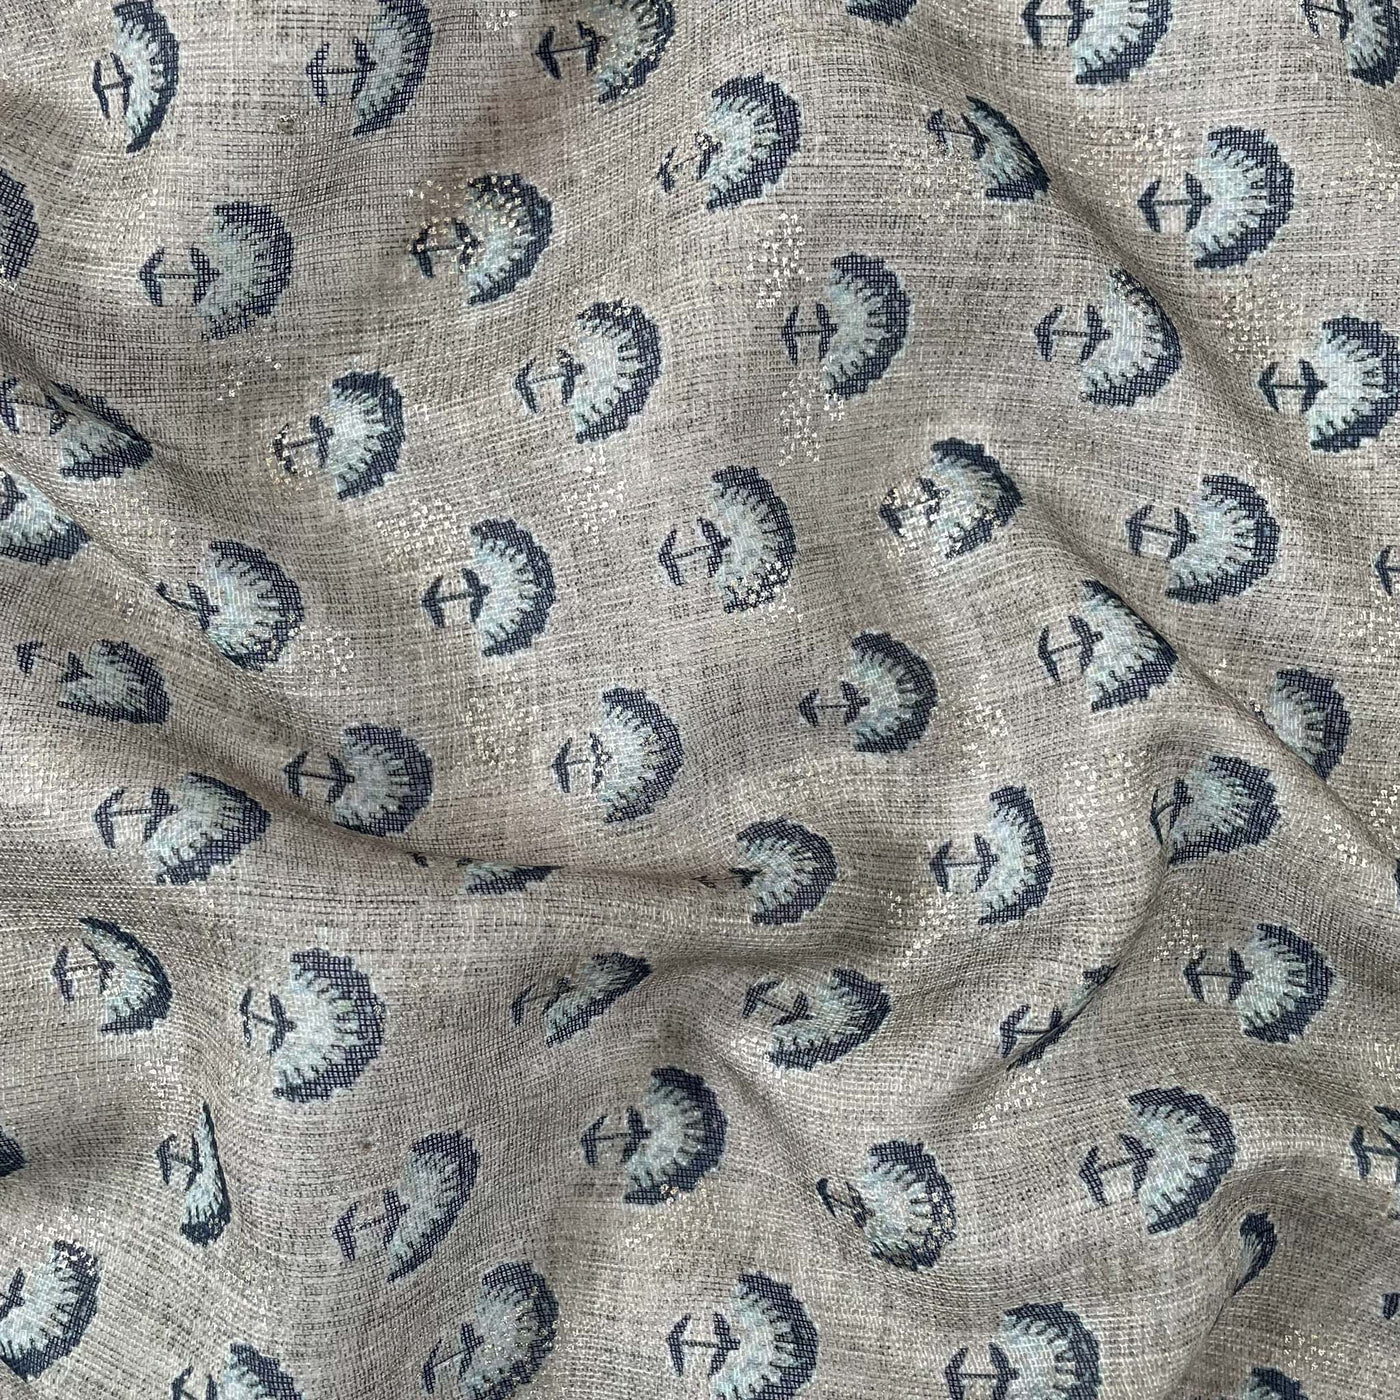 Digital Printed Linen Neps Cut Piece (CUT PIECE) Light Grey and blue Egyptian Floral Digital & Foil Printed Linen Neps Fabric (Width 44 Inches)